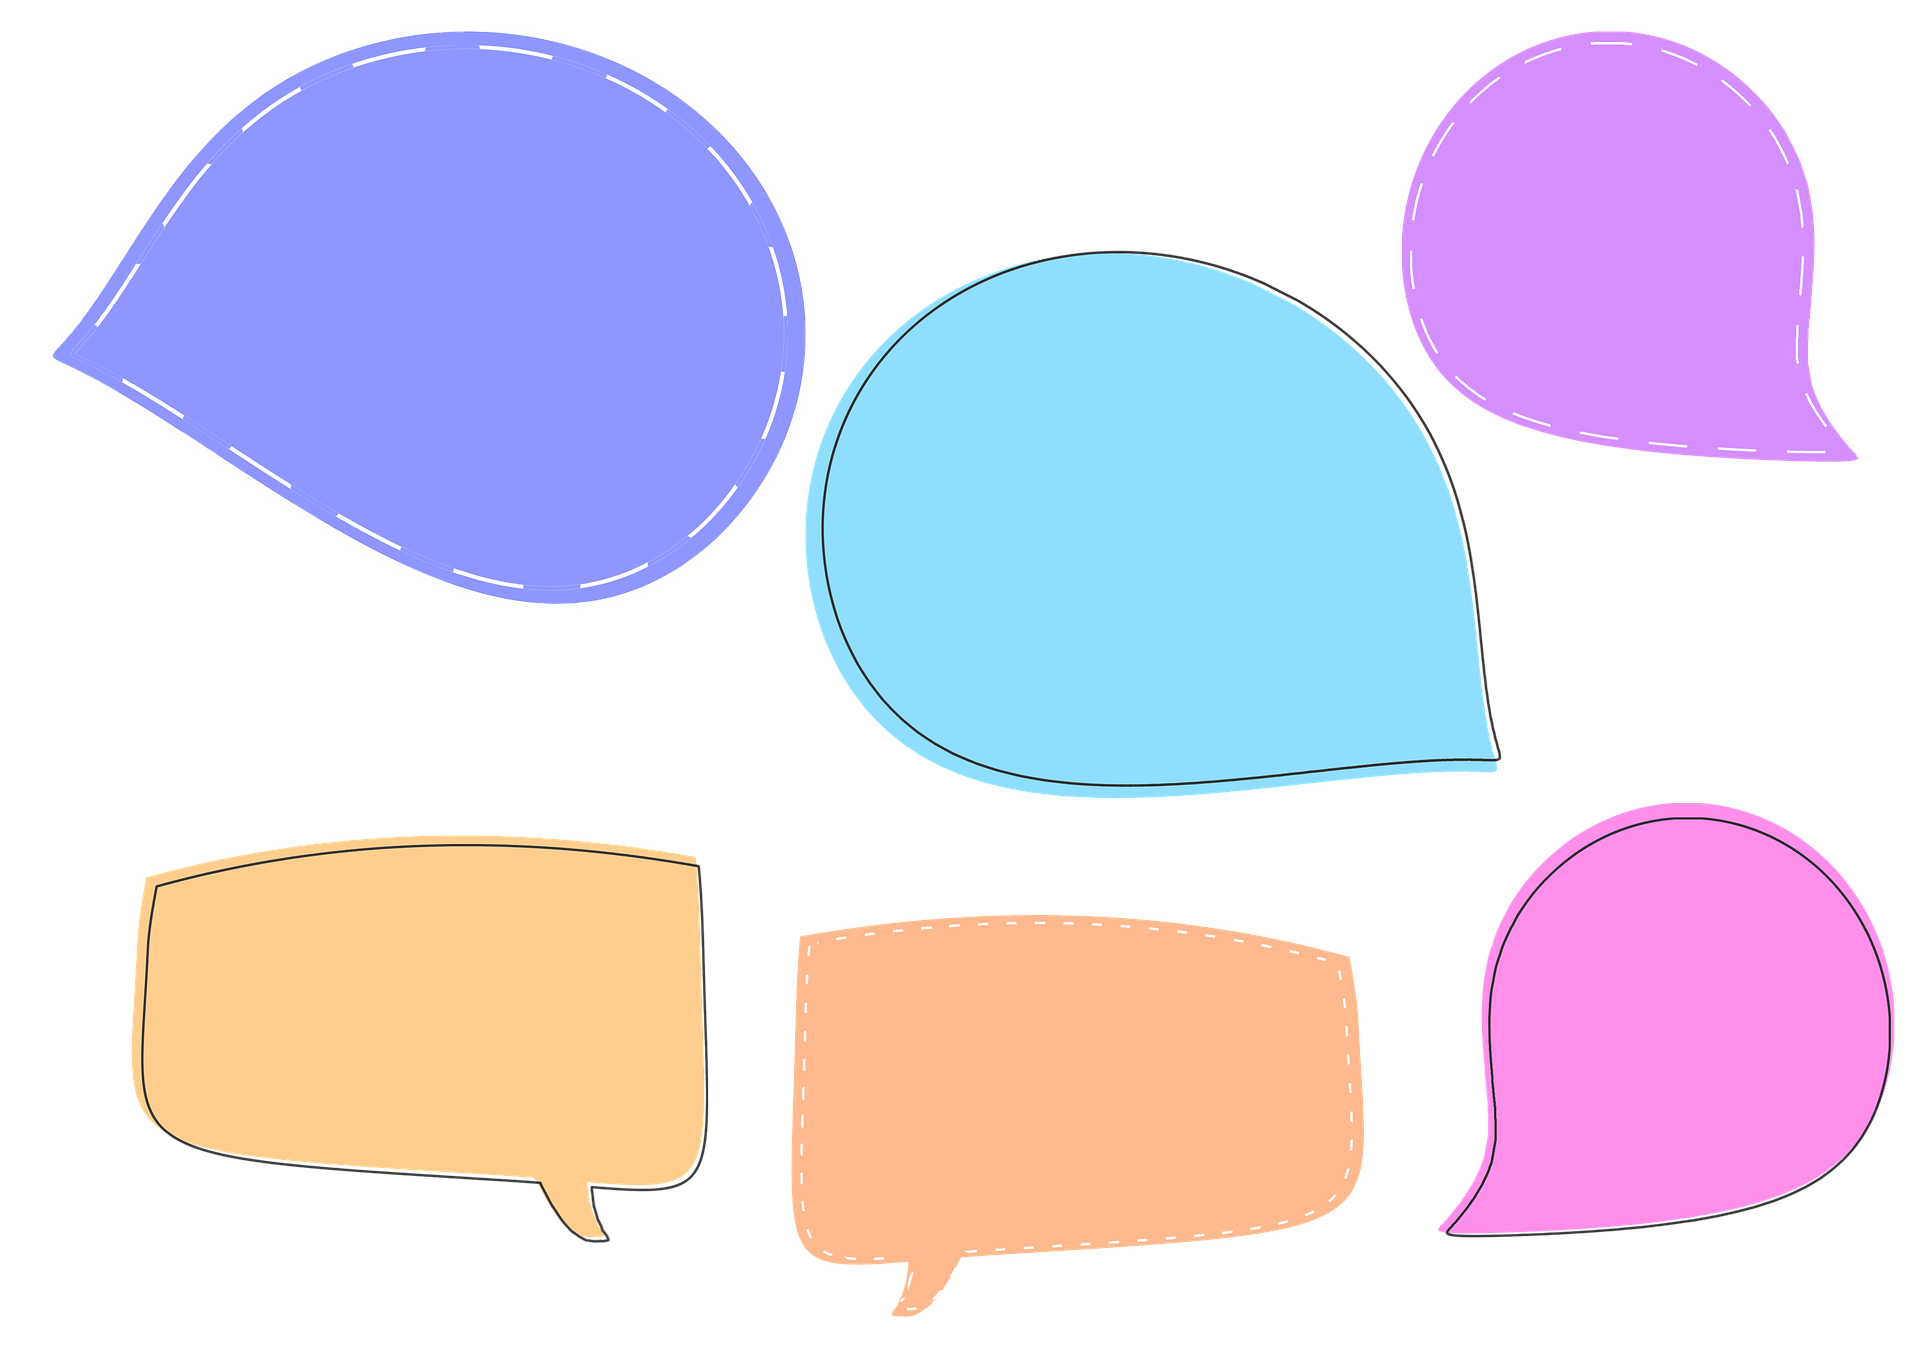 Different coloured thought bubbles